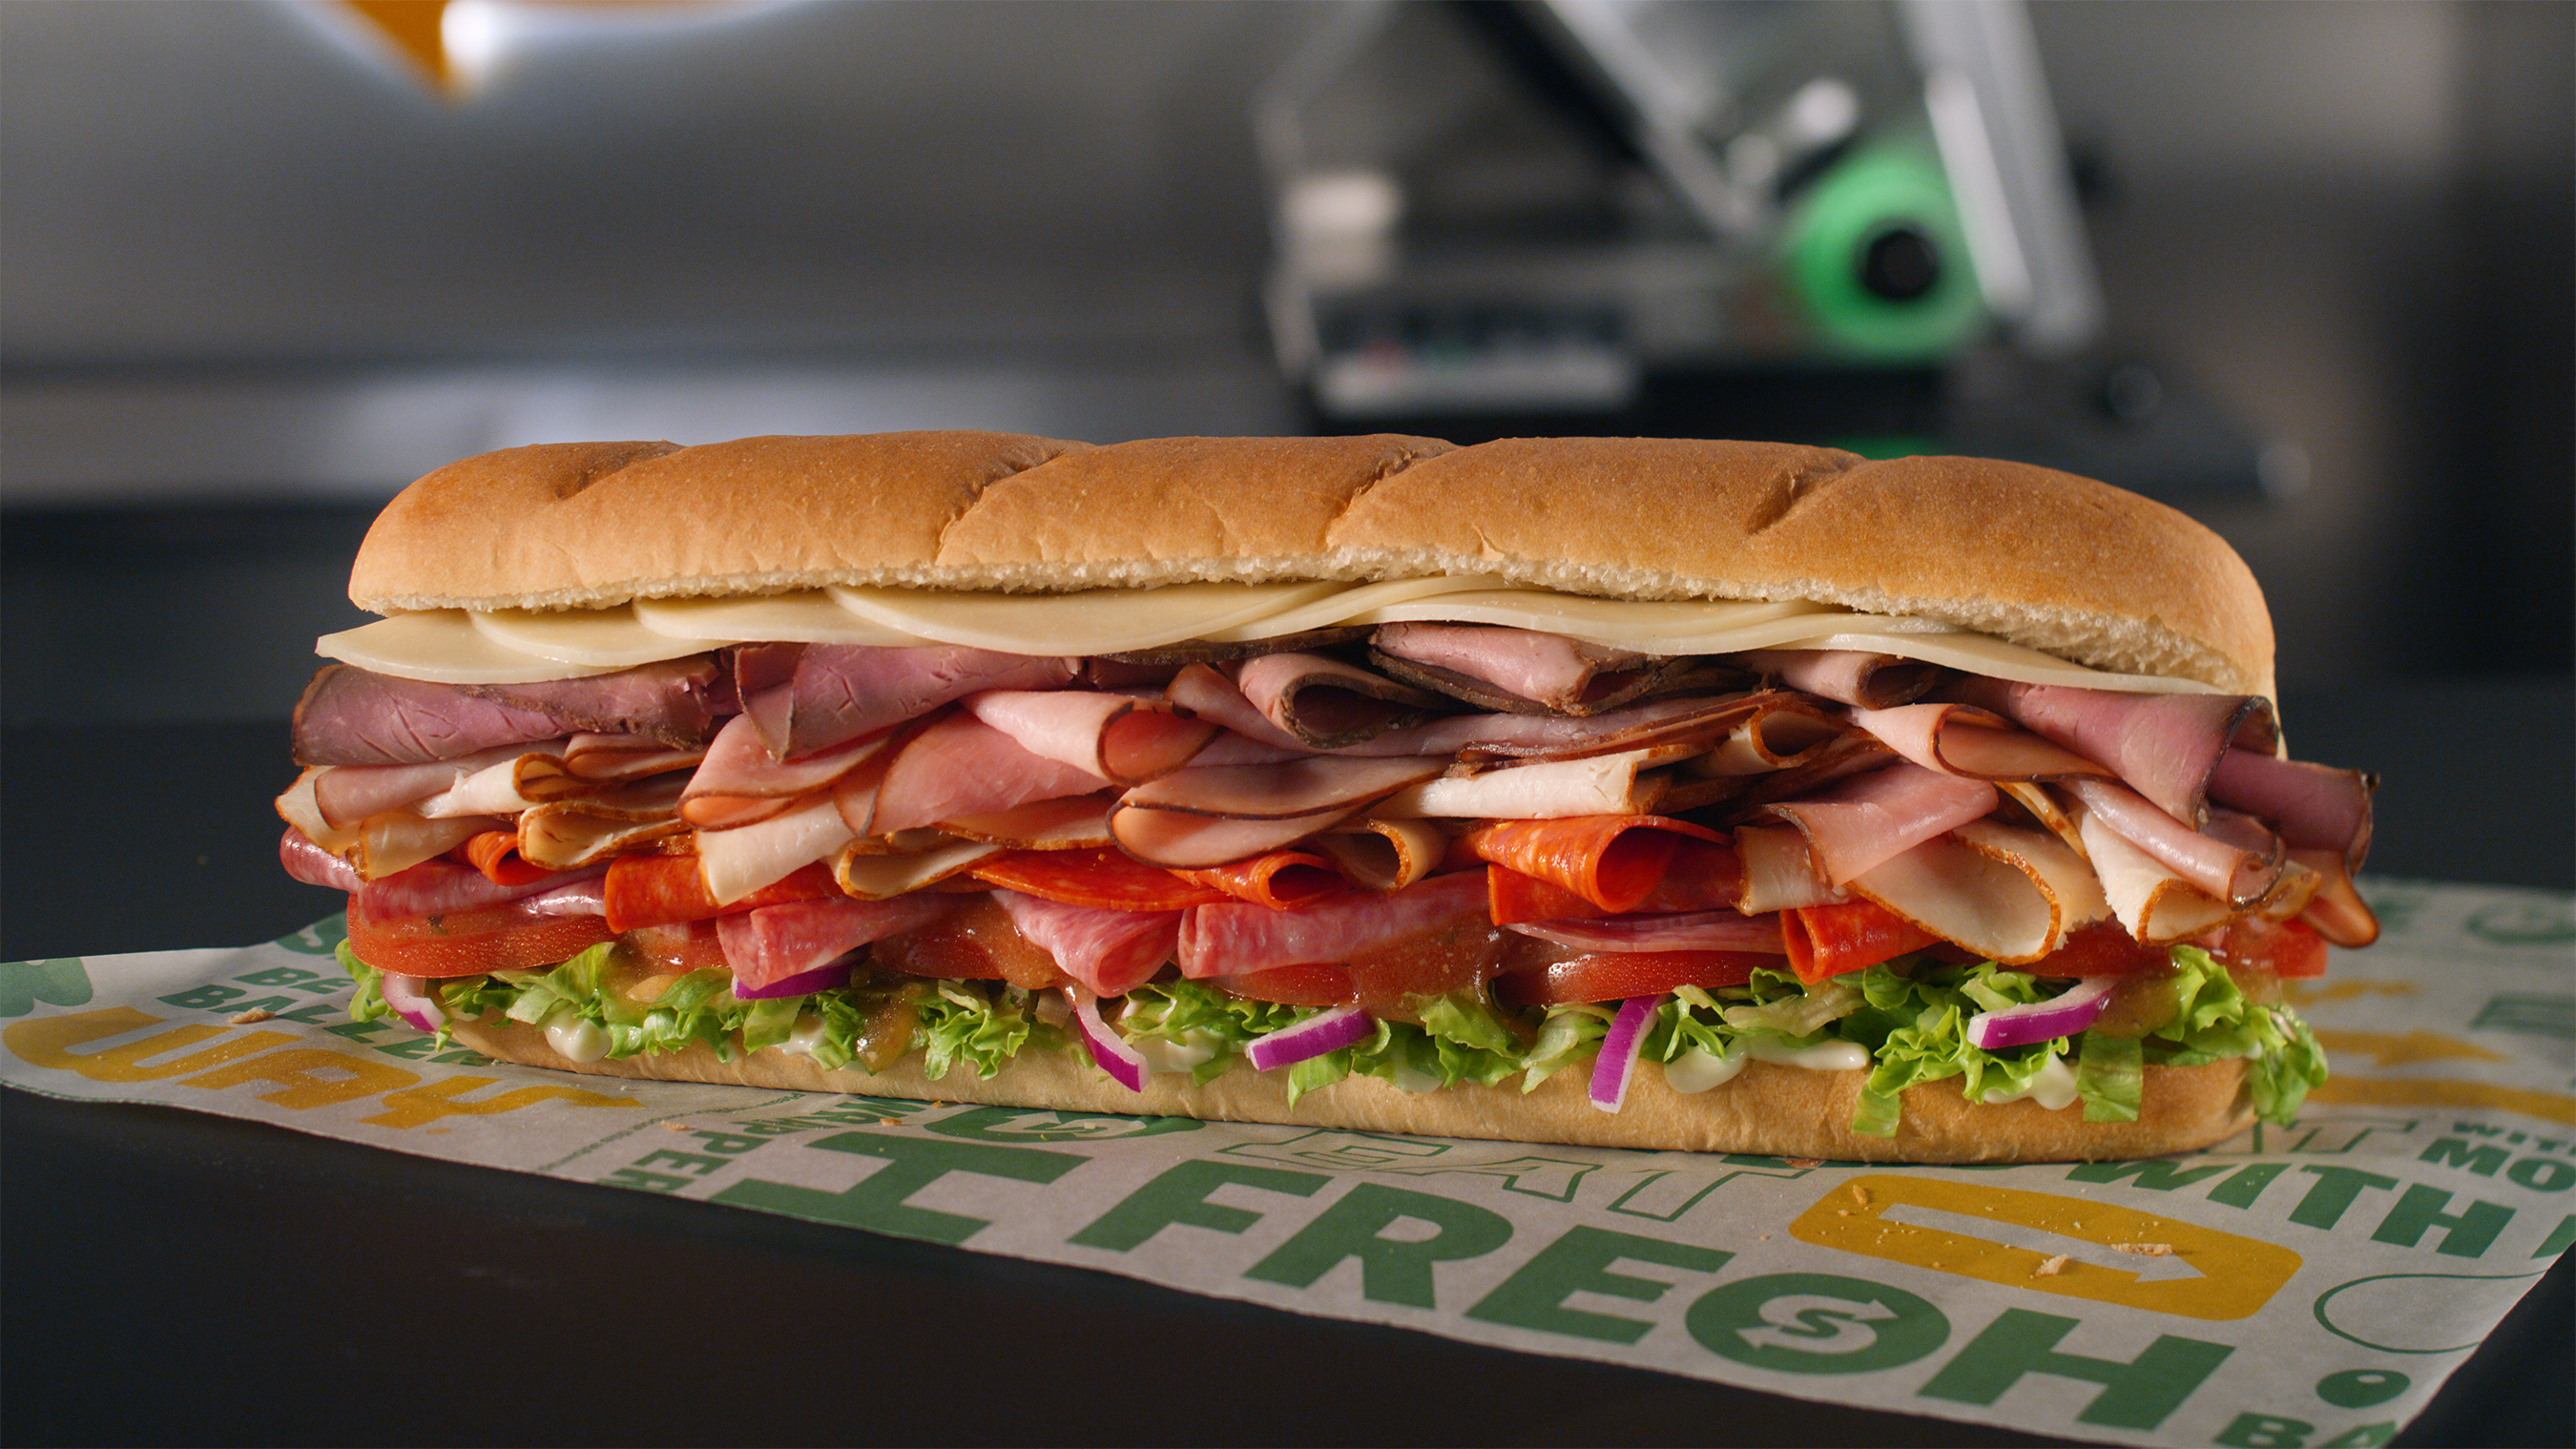 The Beast (#10) includes a half pound of meat with freshly sliced turkey, ham, roast beef, pepperoni and salami, topped with double provolone cheese, lettuce, tomato, red onion and mayonnaise, served on Artisan Italian bread and drizzled with MVP Parmesan Vinaigrette.